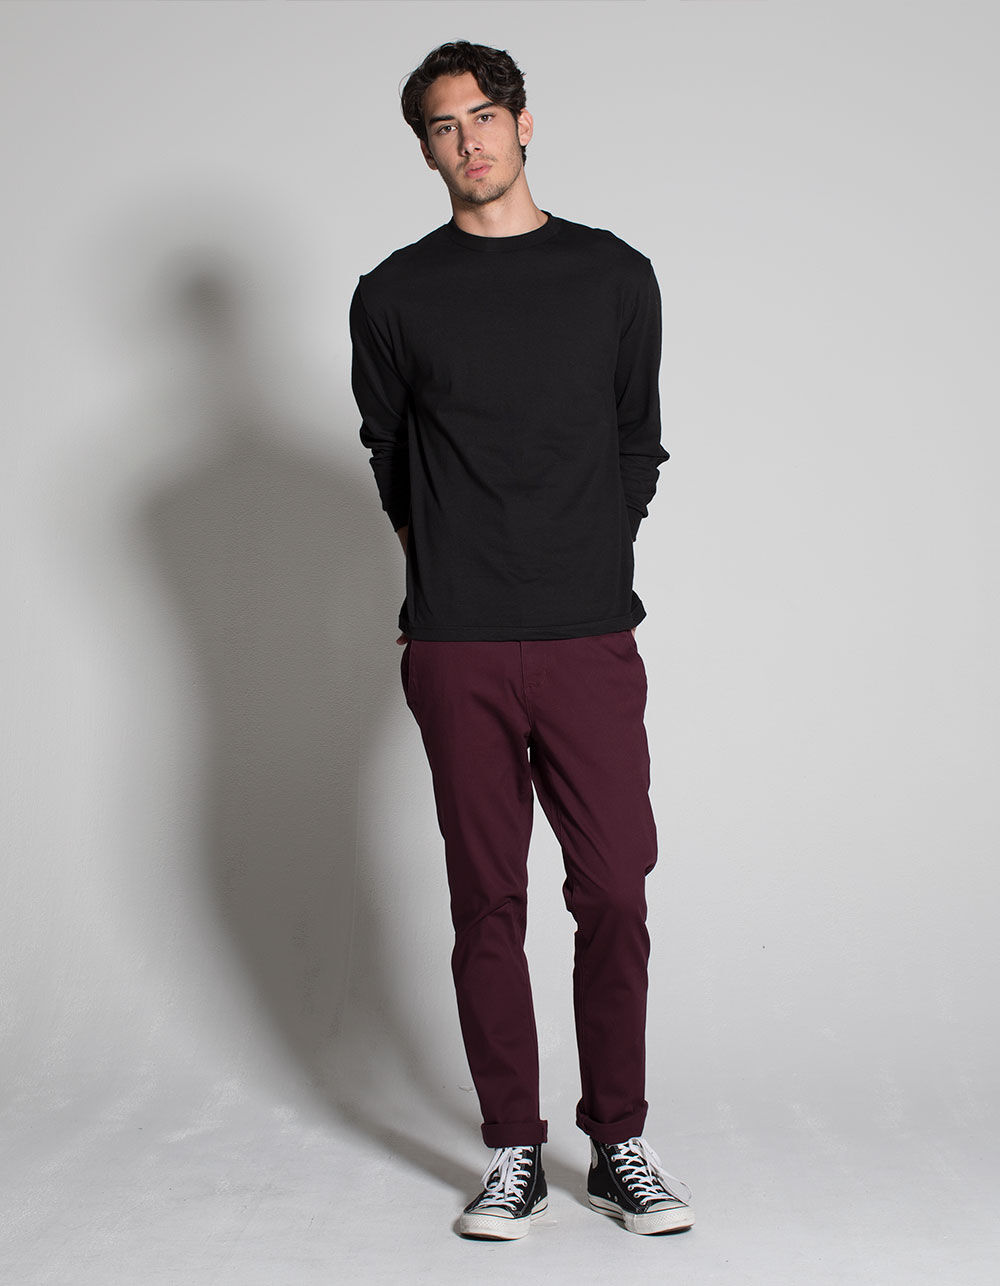 RSQ London Blackberry Mens Skinny Stretch Chino Pants image number 1